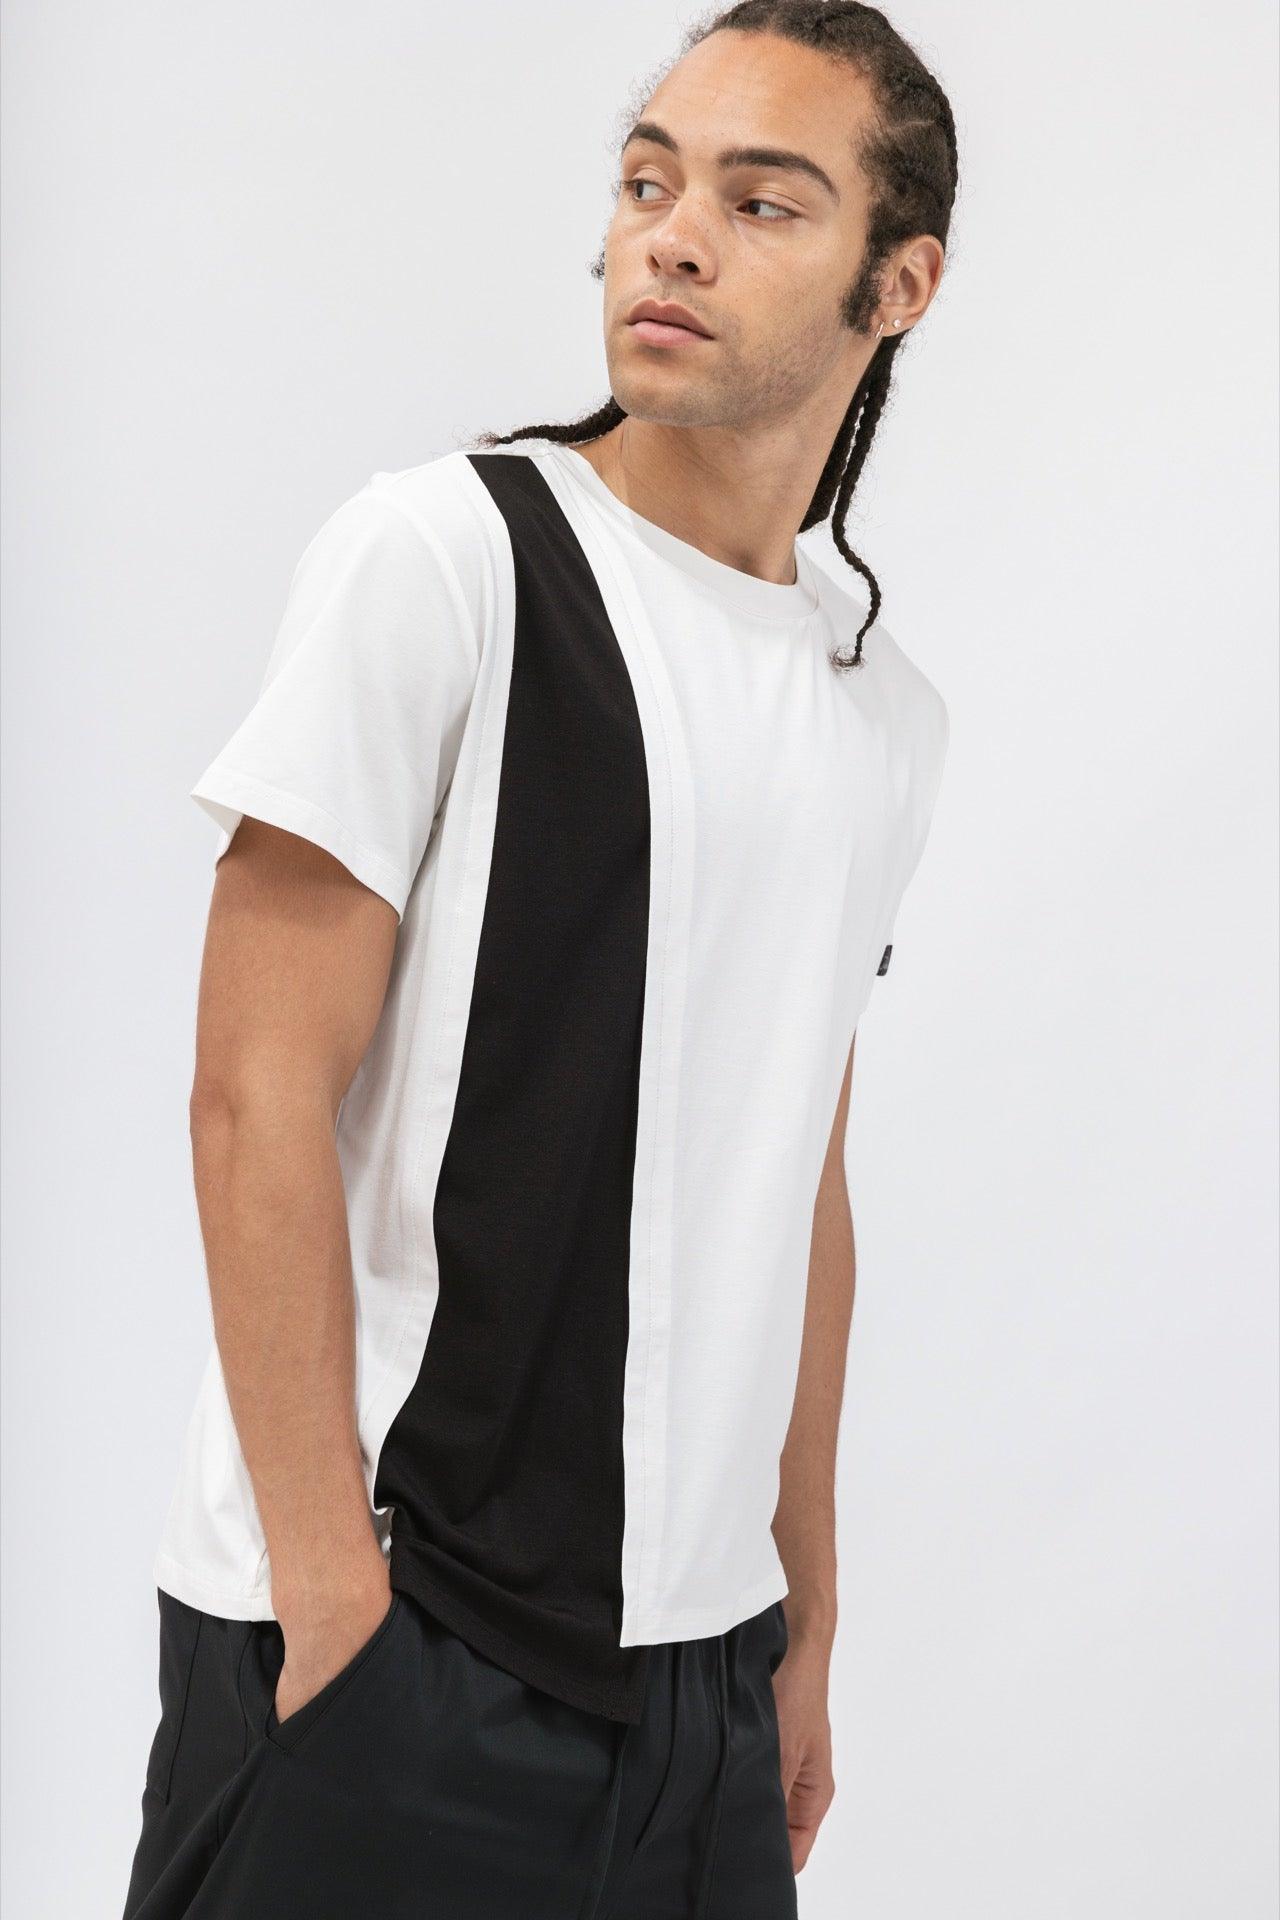 Men's Color Block Tee - NOT LABELED